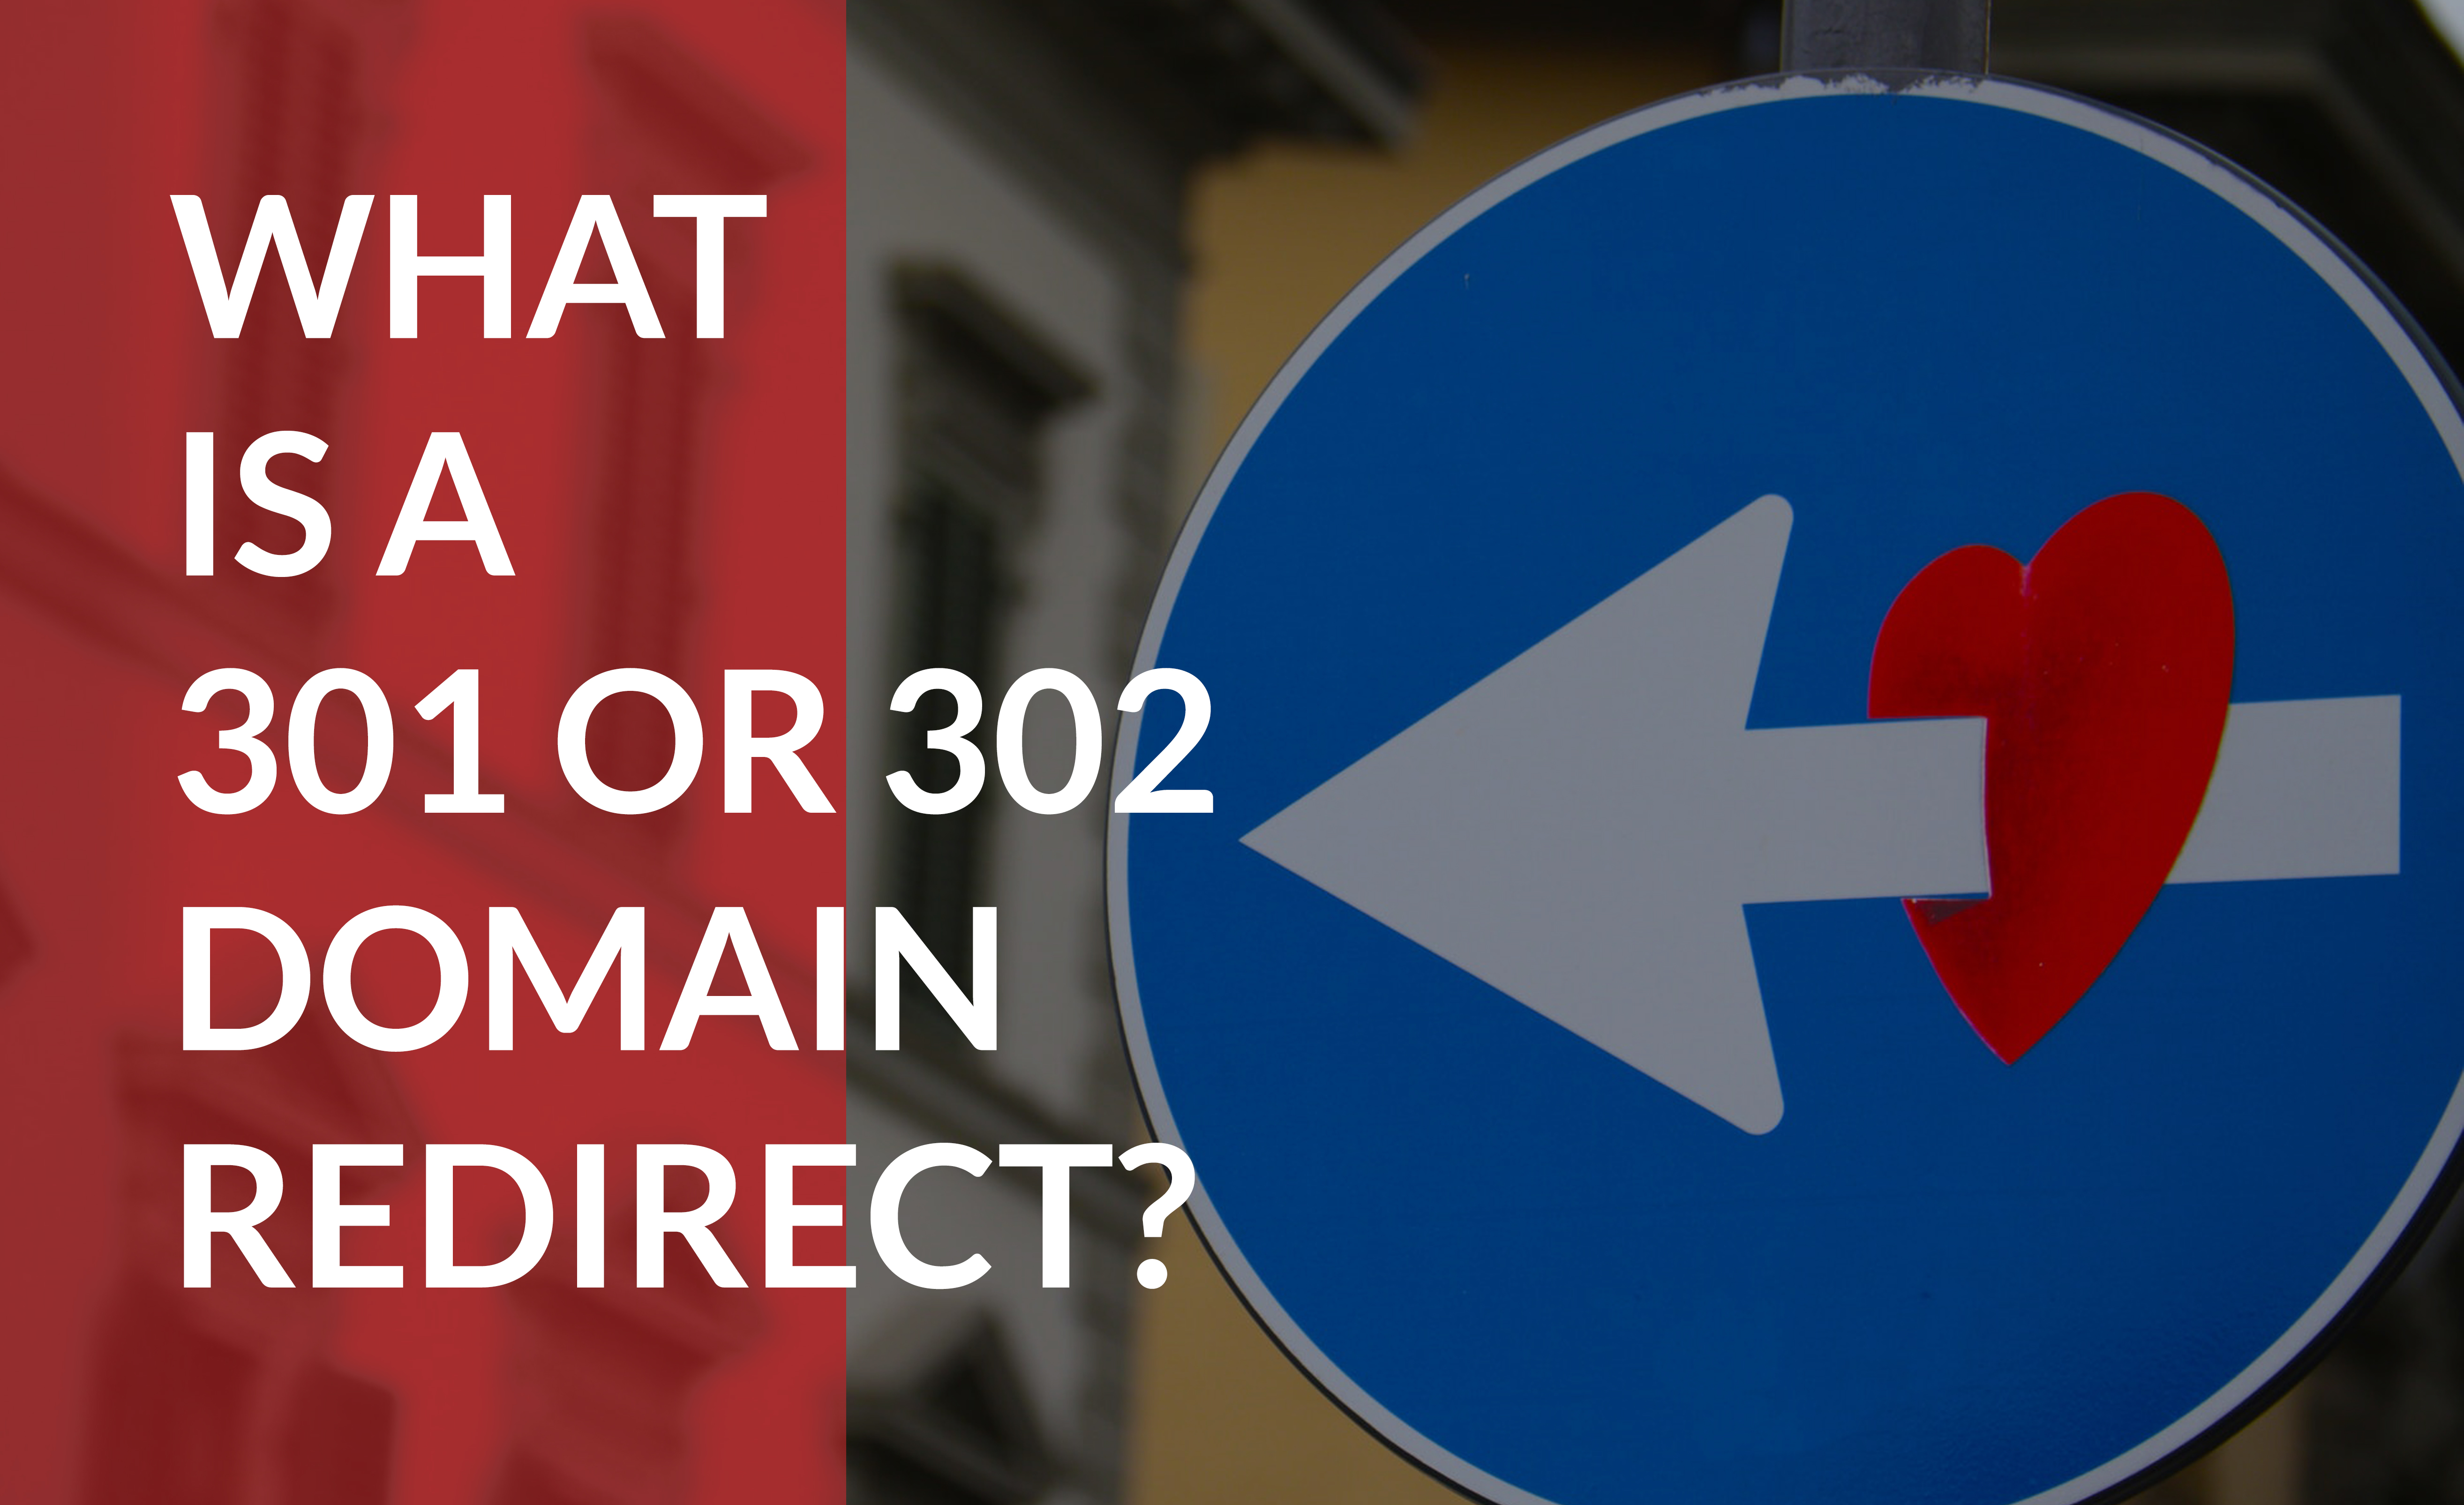 Find out how a 301 and 302 work to move your web traffic in the right direction.